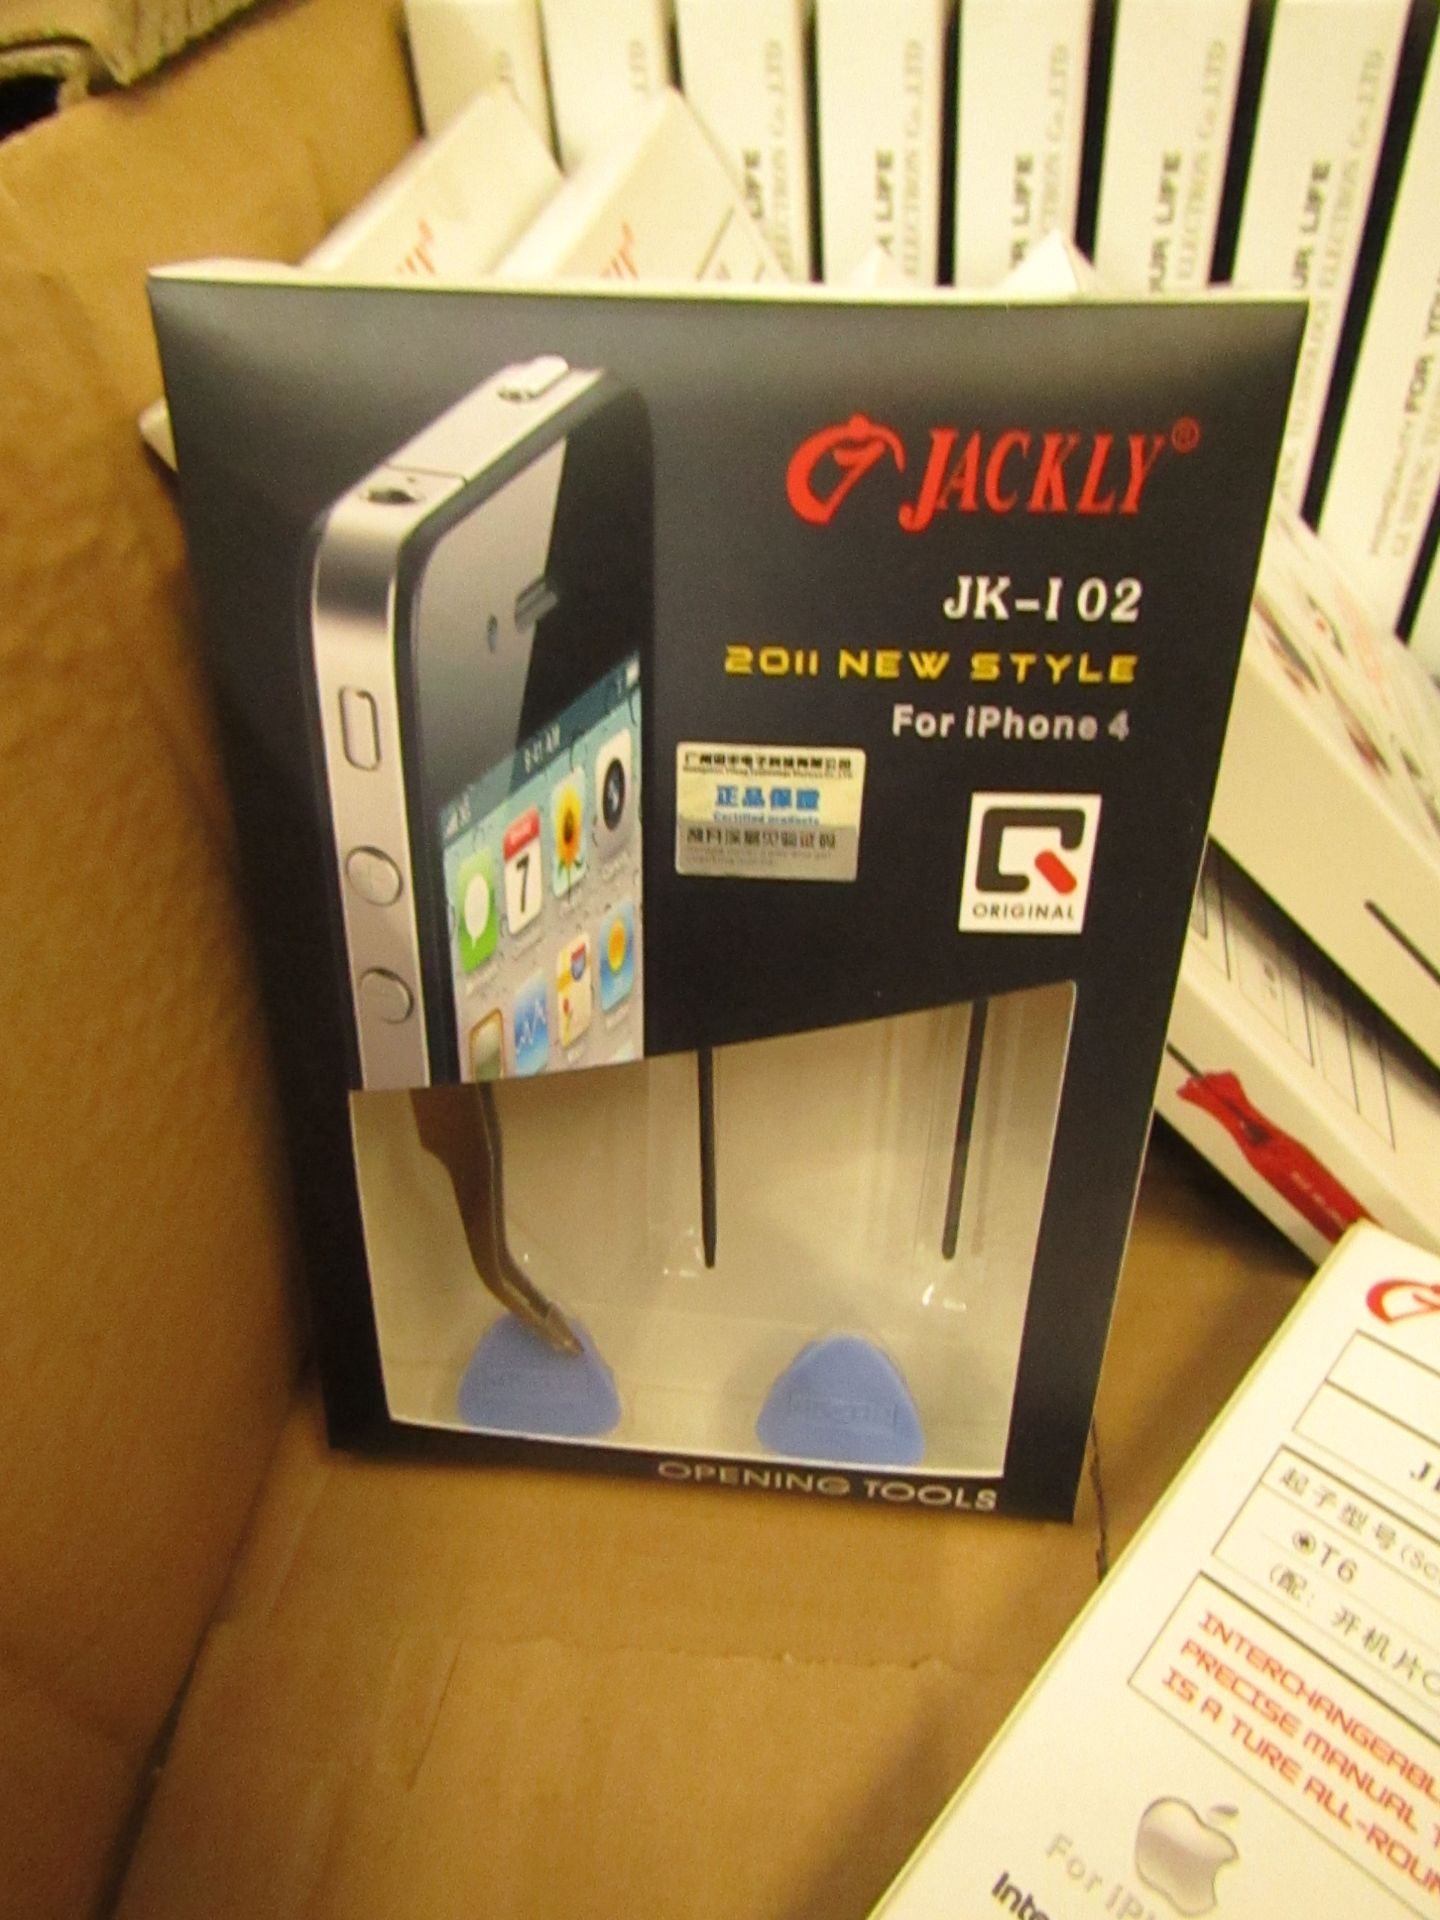 20 x Iphone 4 Opening Kits. New & boxed